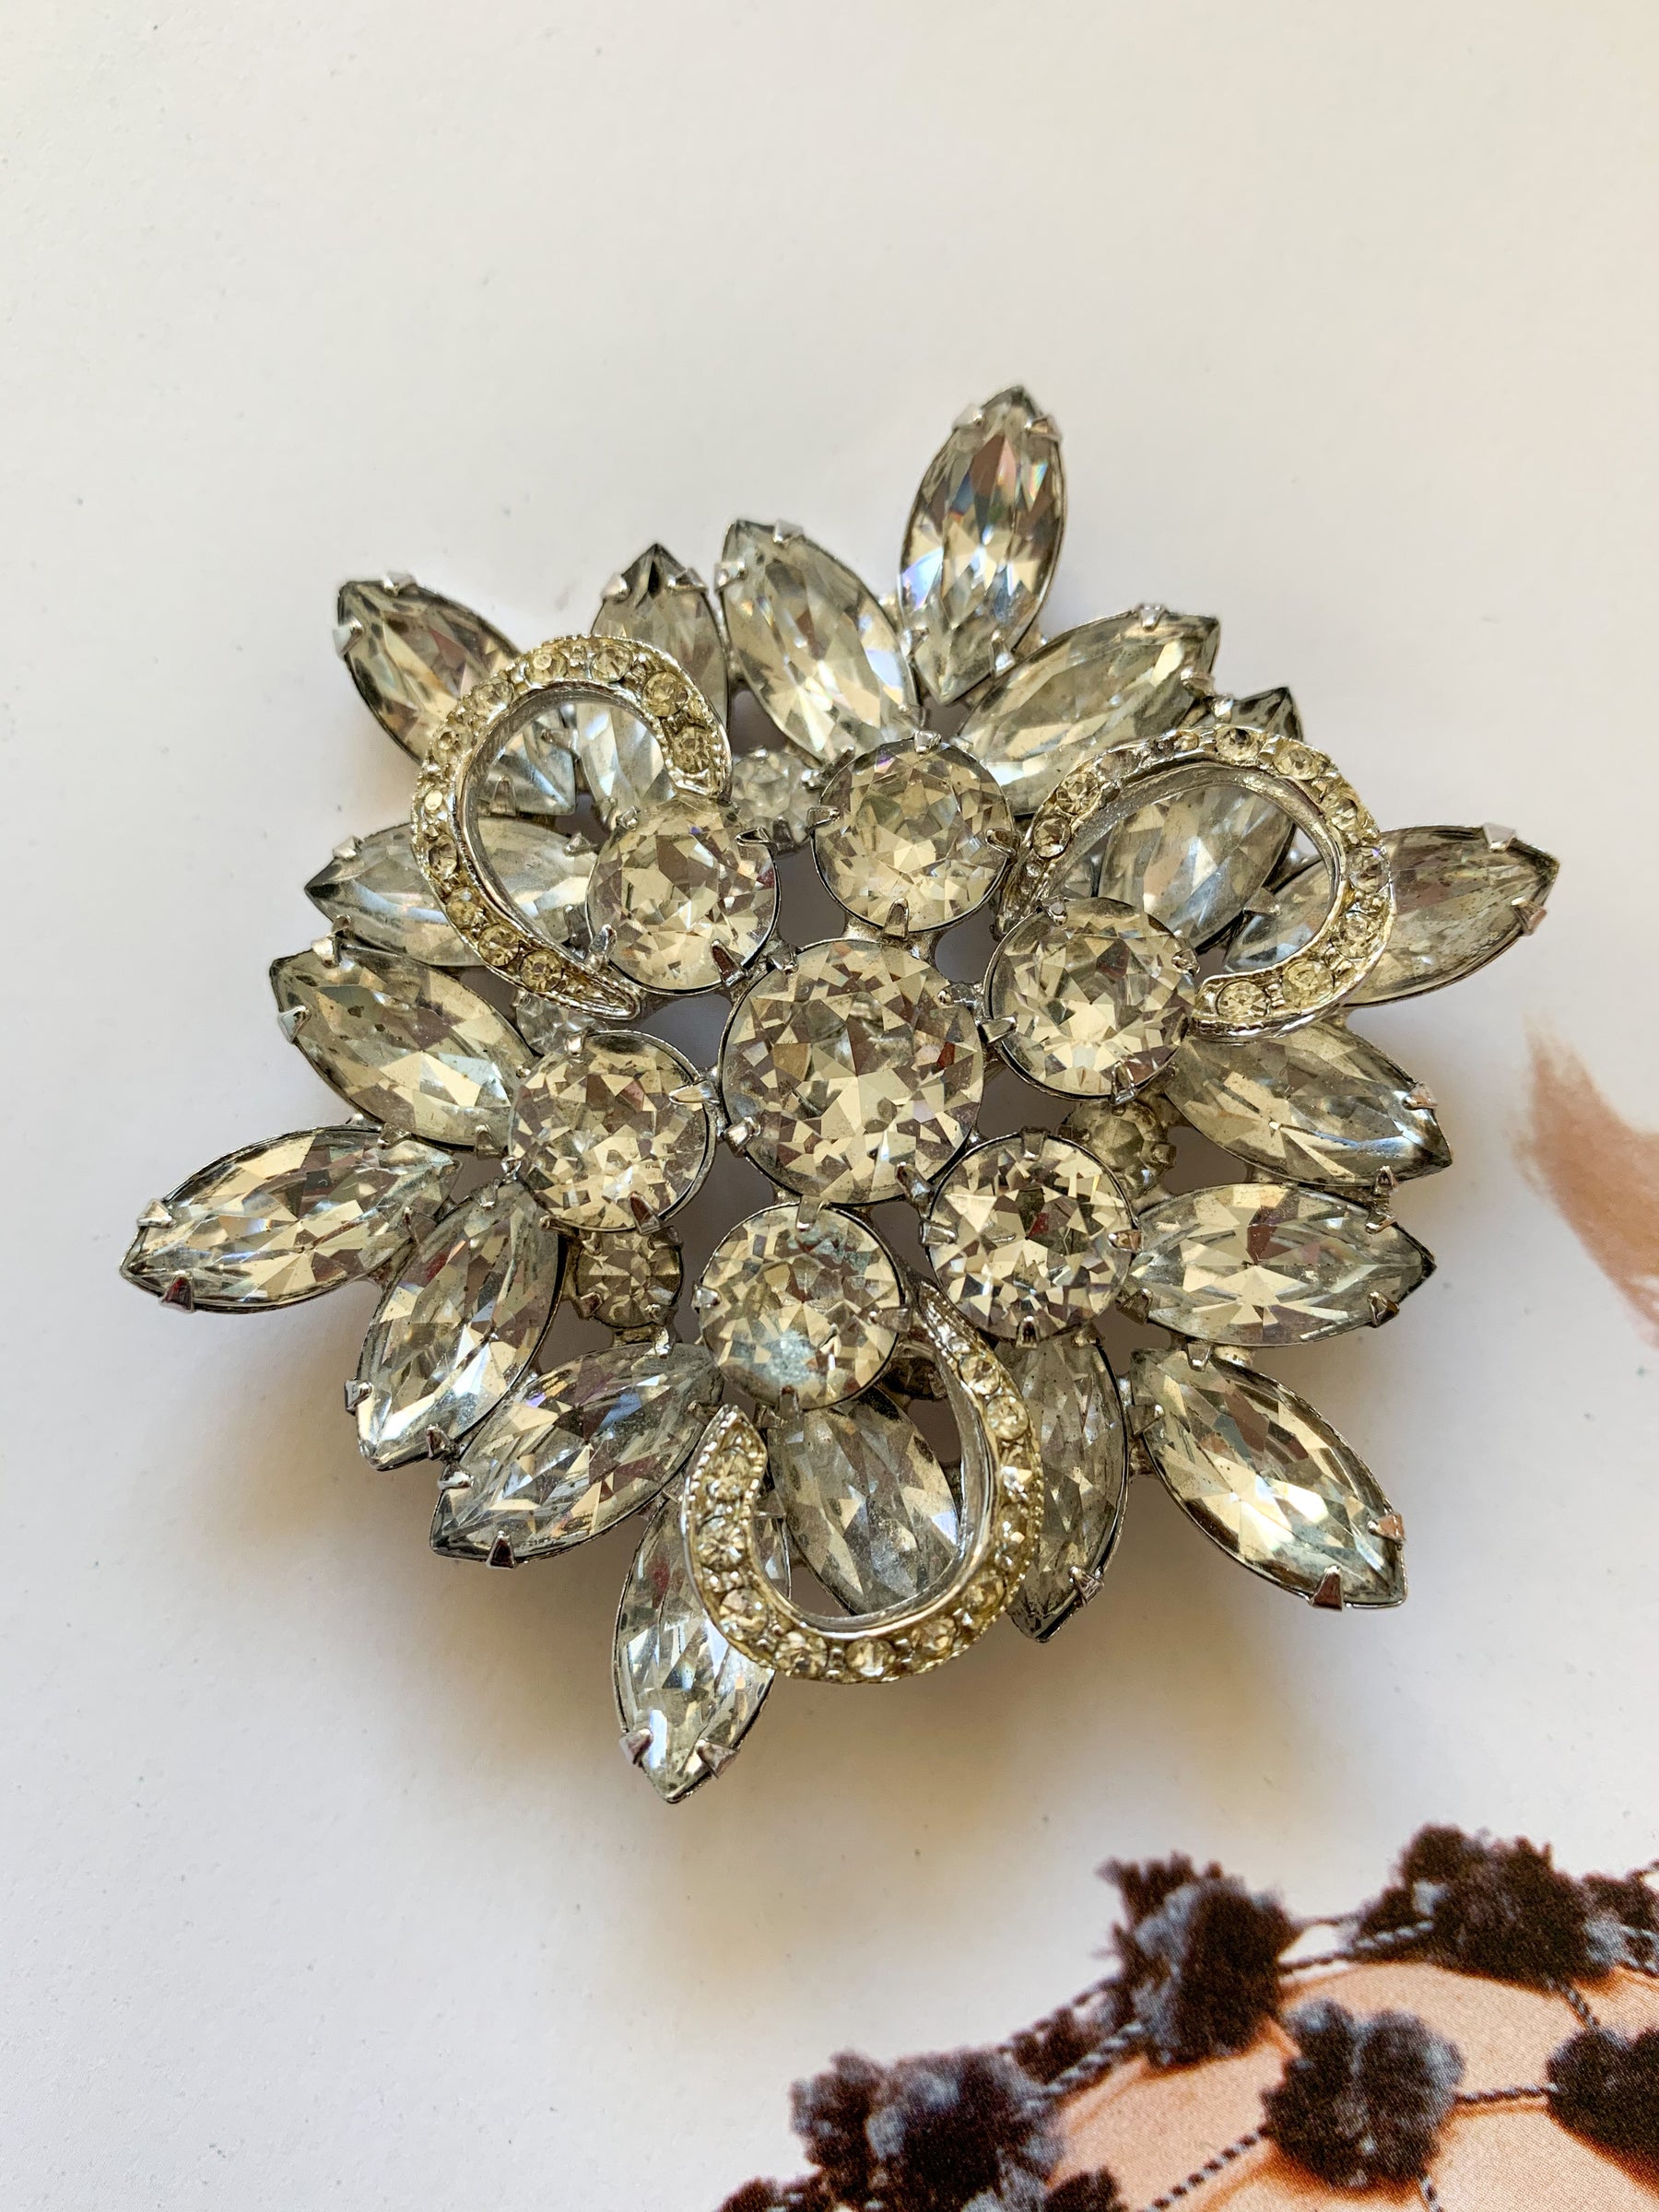 Weiss Flower Brooch Yellow Daisy The Resale Boutique